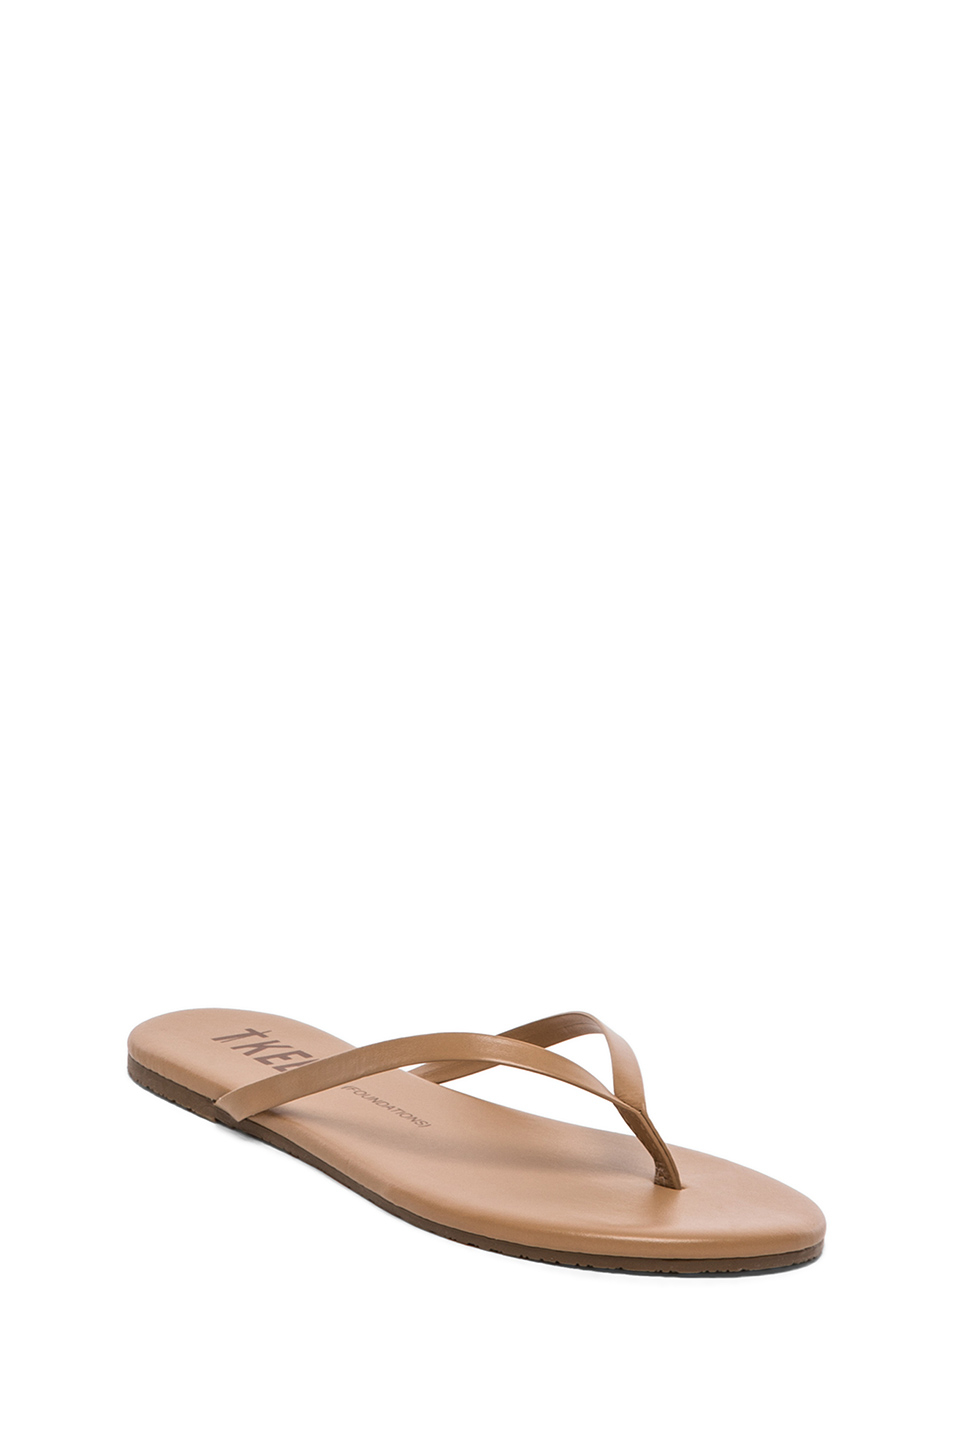 Tkees Sandal in Natural | Lyst